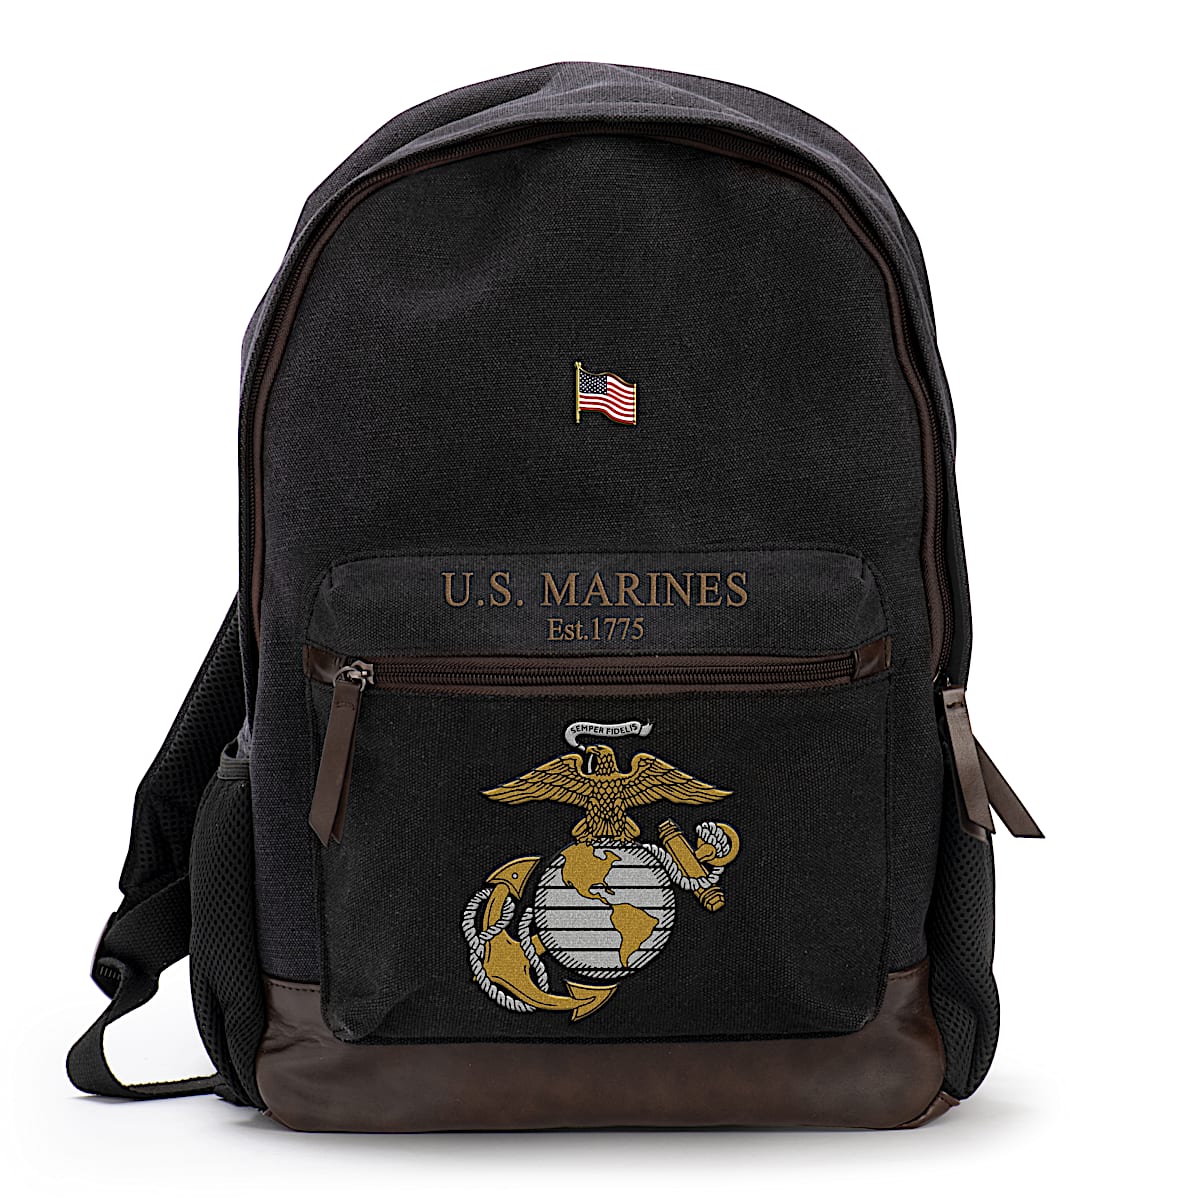 U.S. Marines Black Canvas Backpack Featuring An Embroidered USMC Emblem &  Brown Faux Leather Accents With A Free American Flag Pin